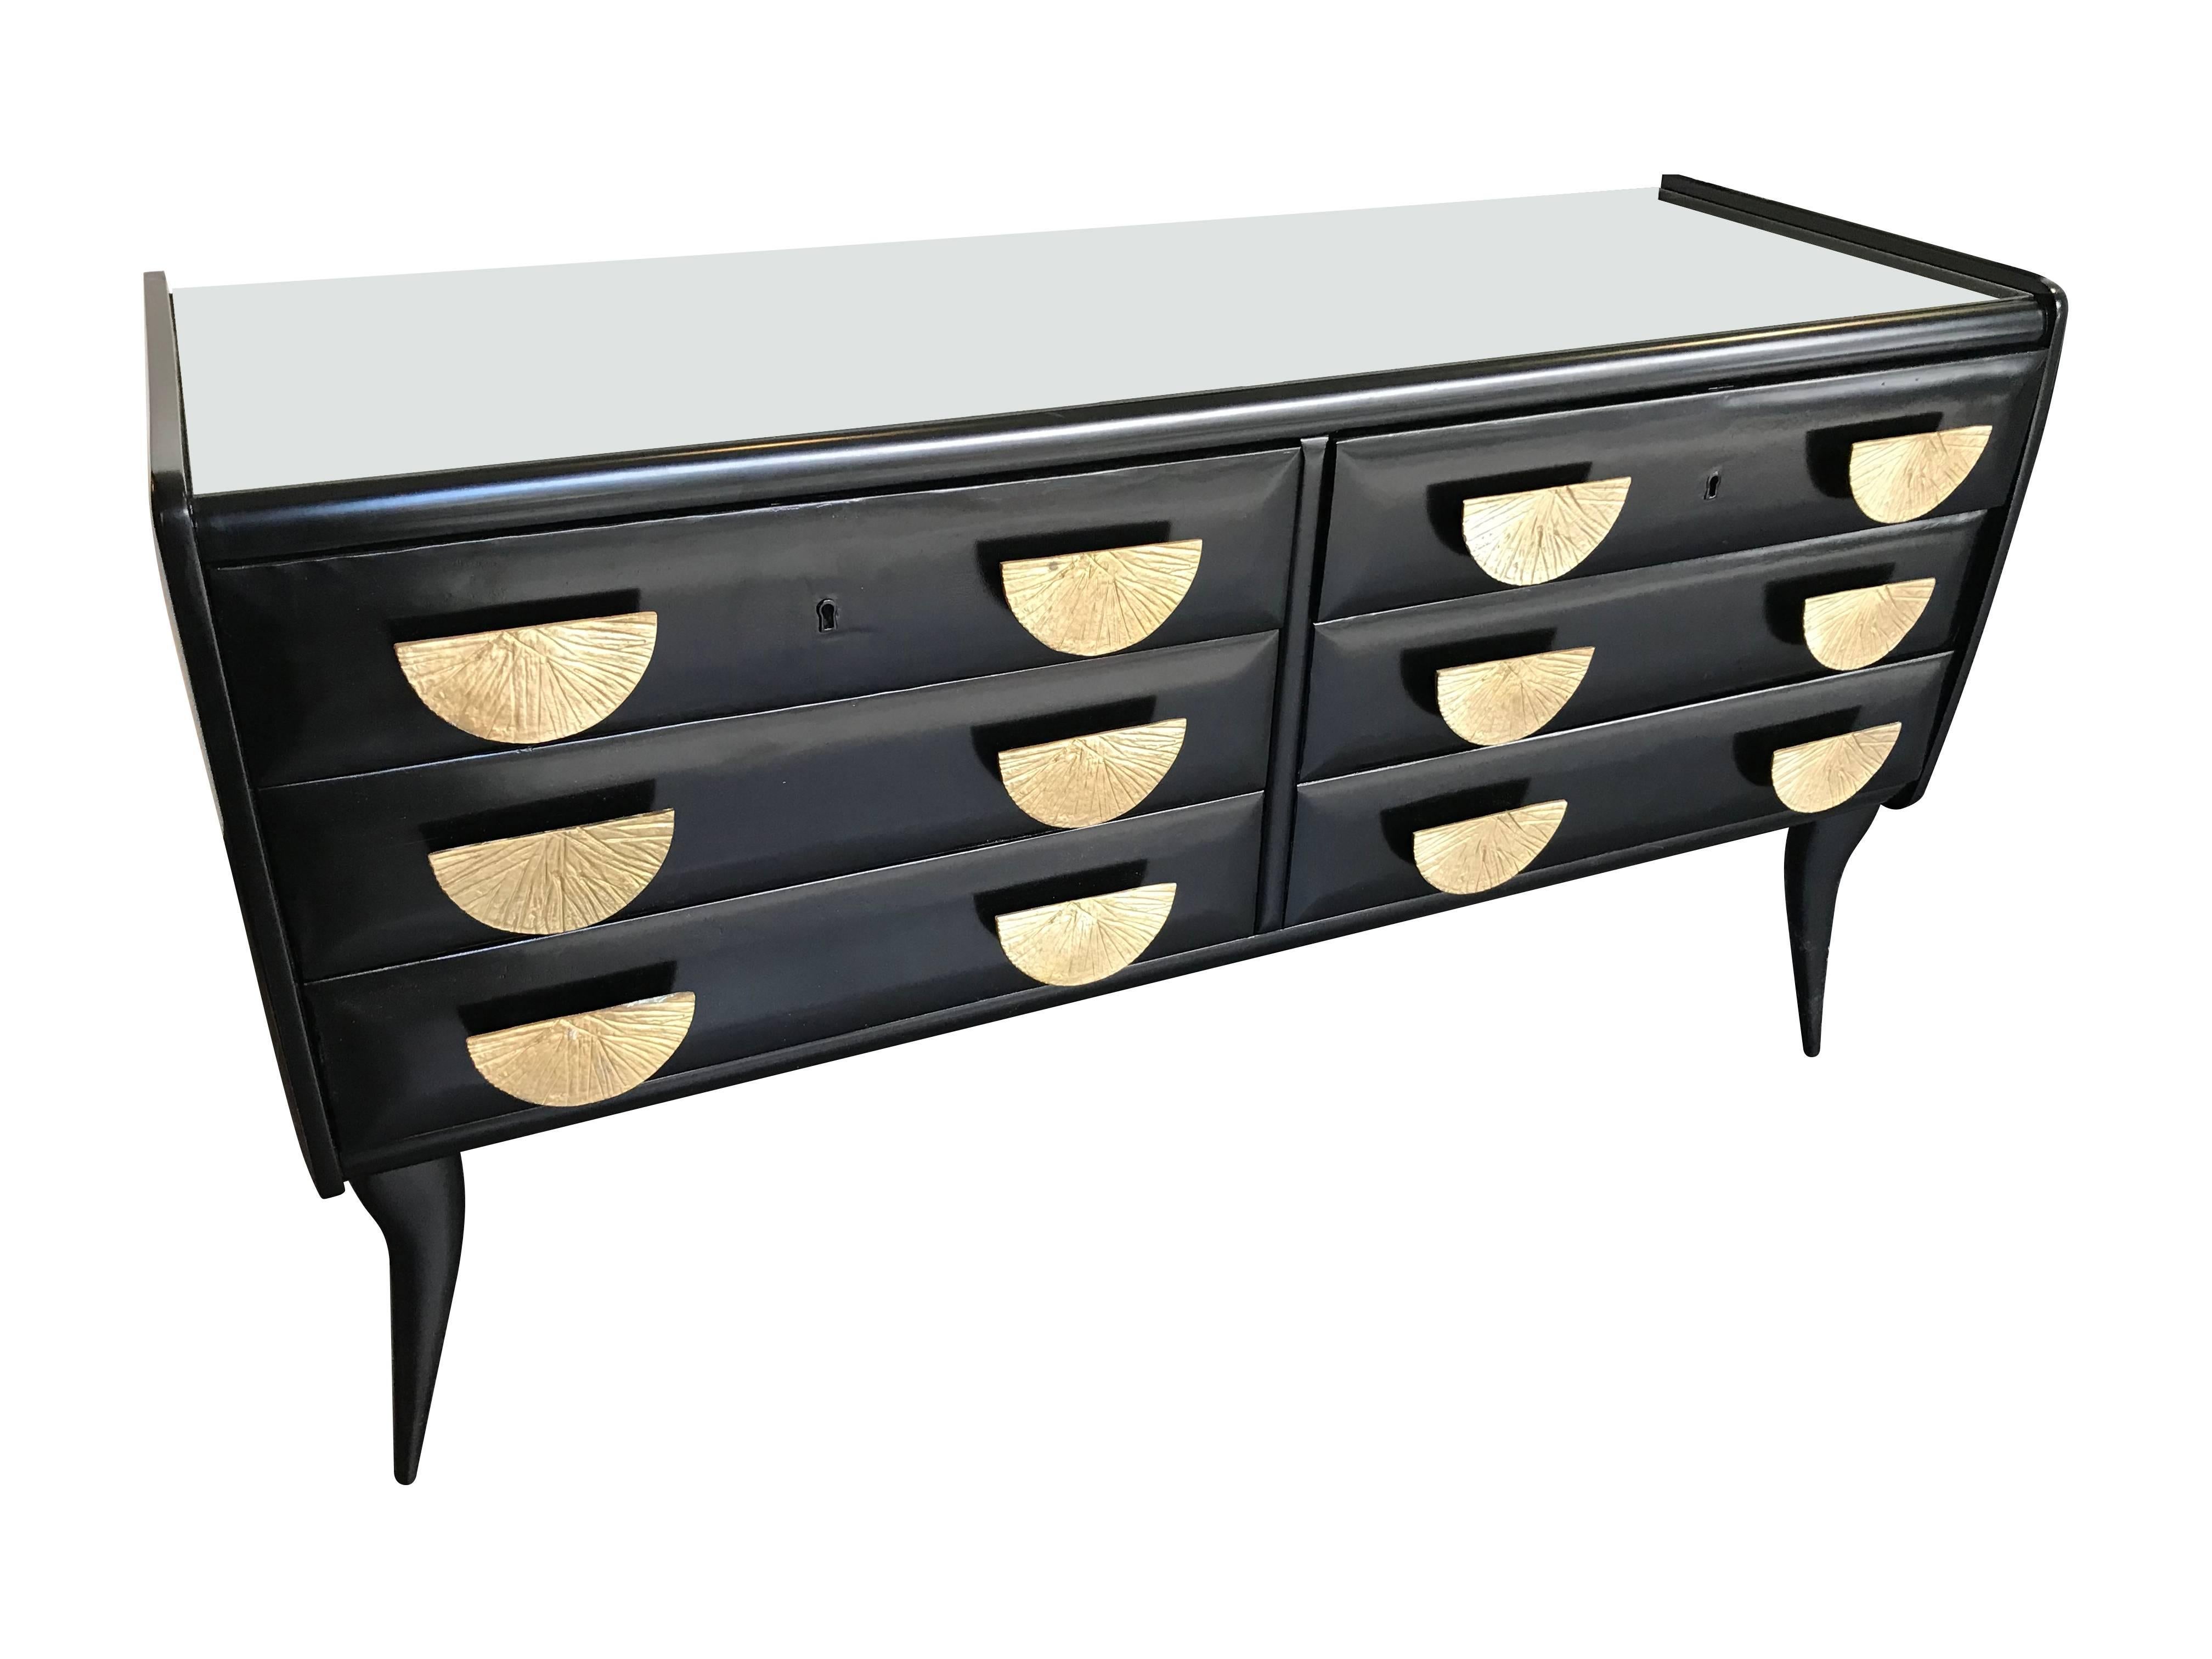 An Italian 1950s ebonised chest of drawers with six drawers, each with two brass, cast handles. With full mirrored top.